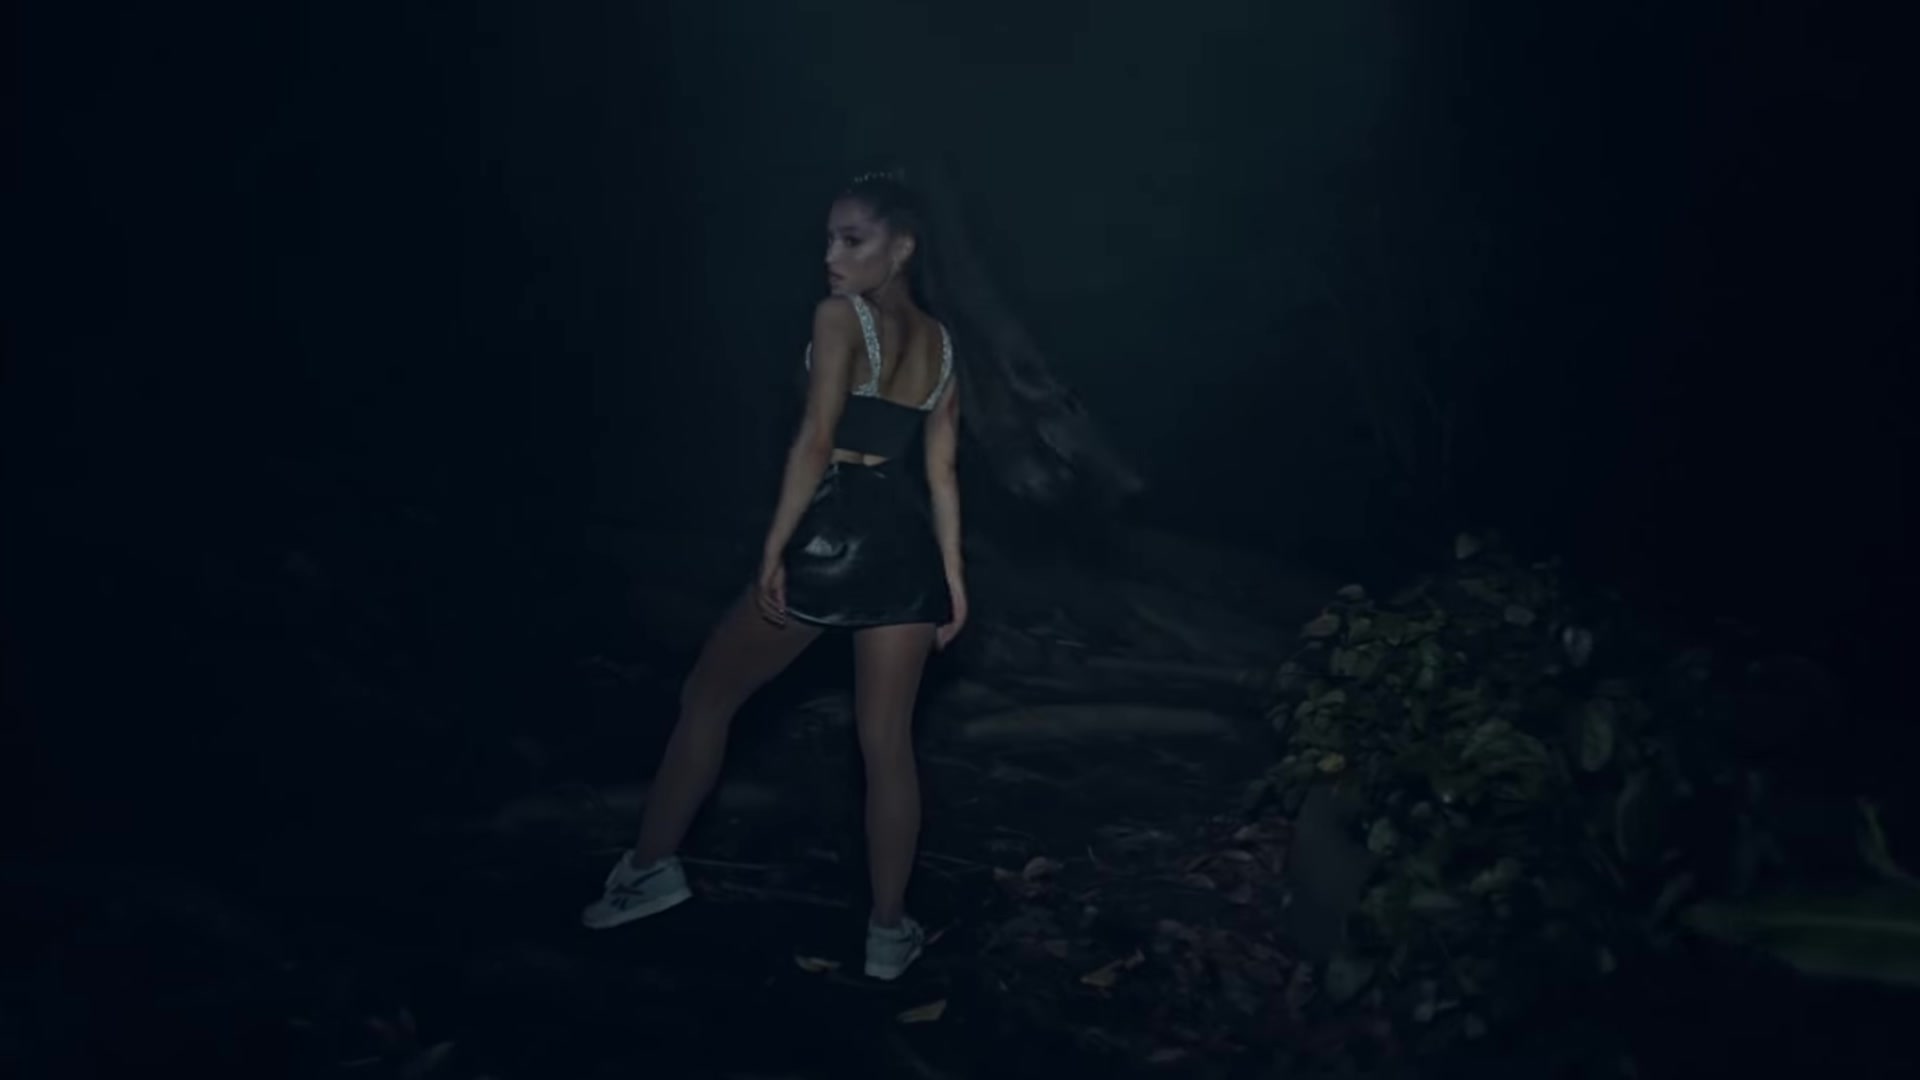 Reebok Sneakers Worn by Ariana Grande in The Light Is Coming (2018) Official Music Video